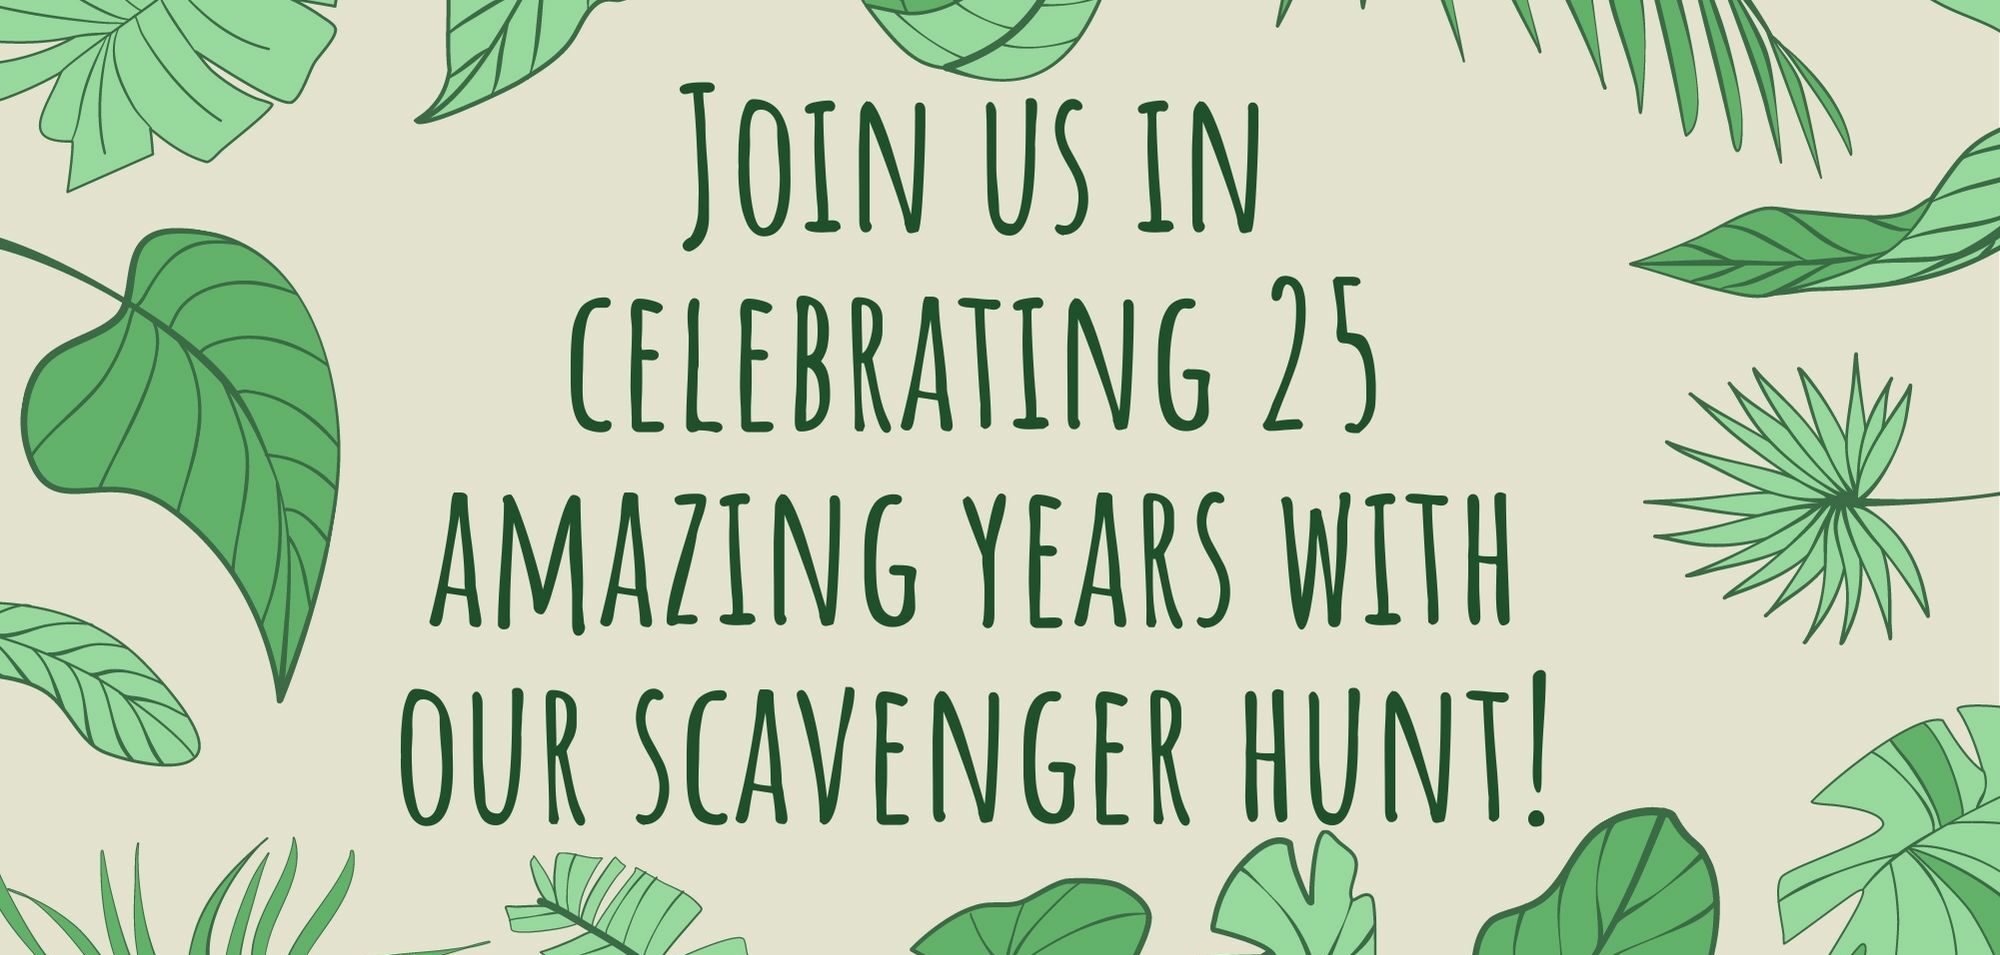 Join us in celebrating 25 amazing years